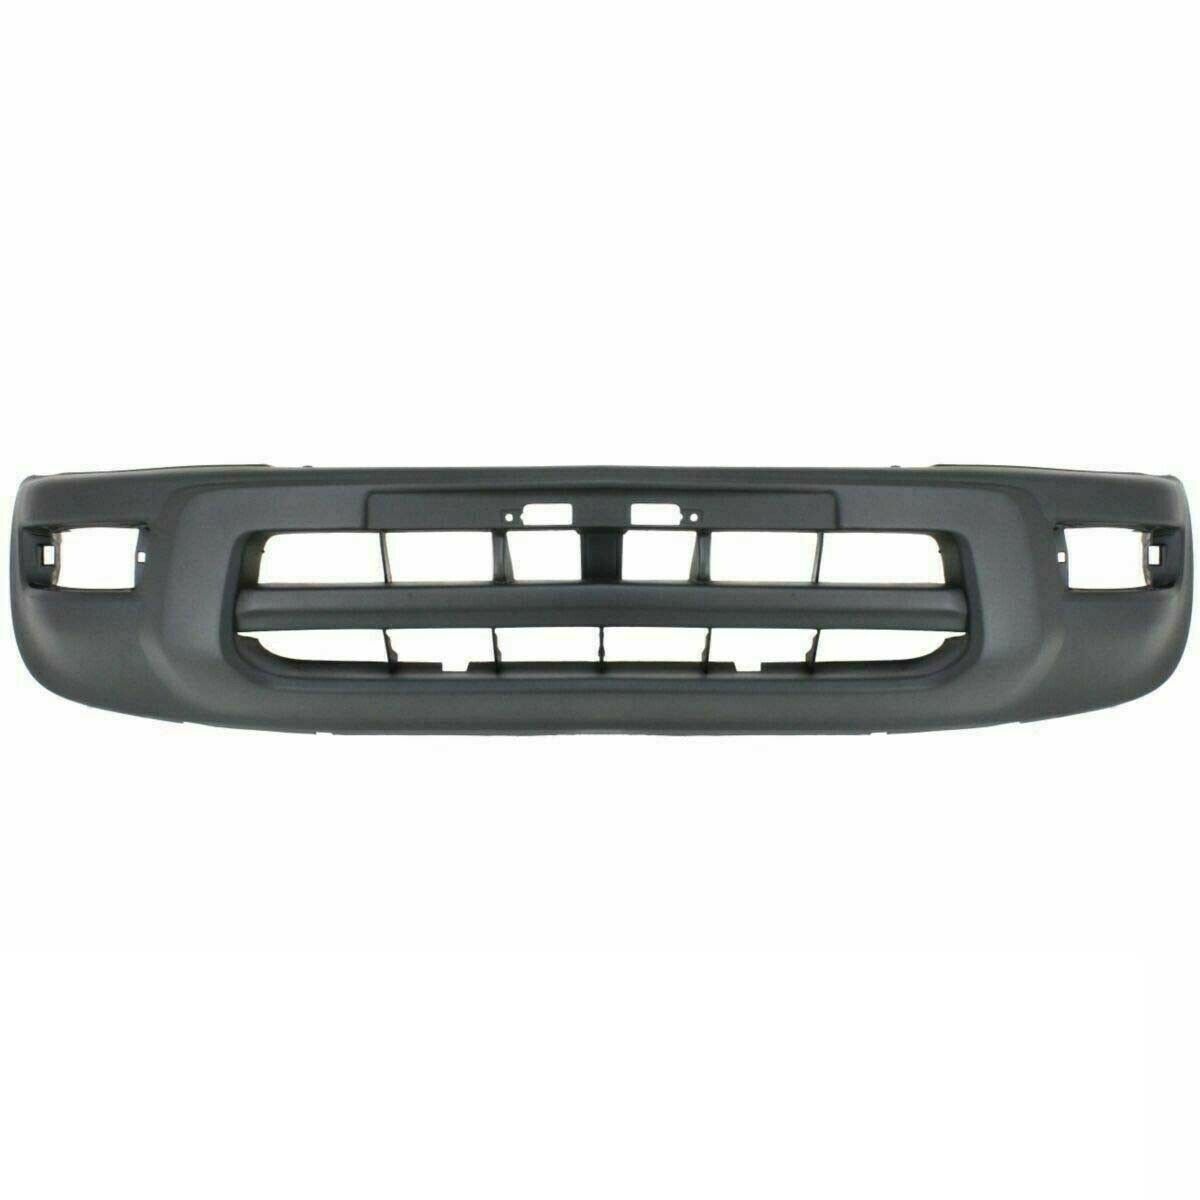 1998-2000 Toyota Rav4 Front Bumper Painted to Match